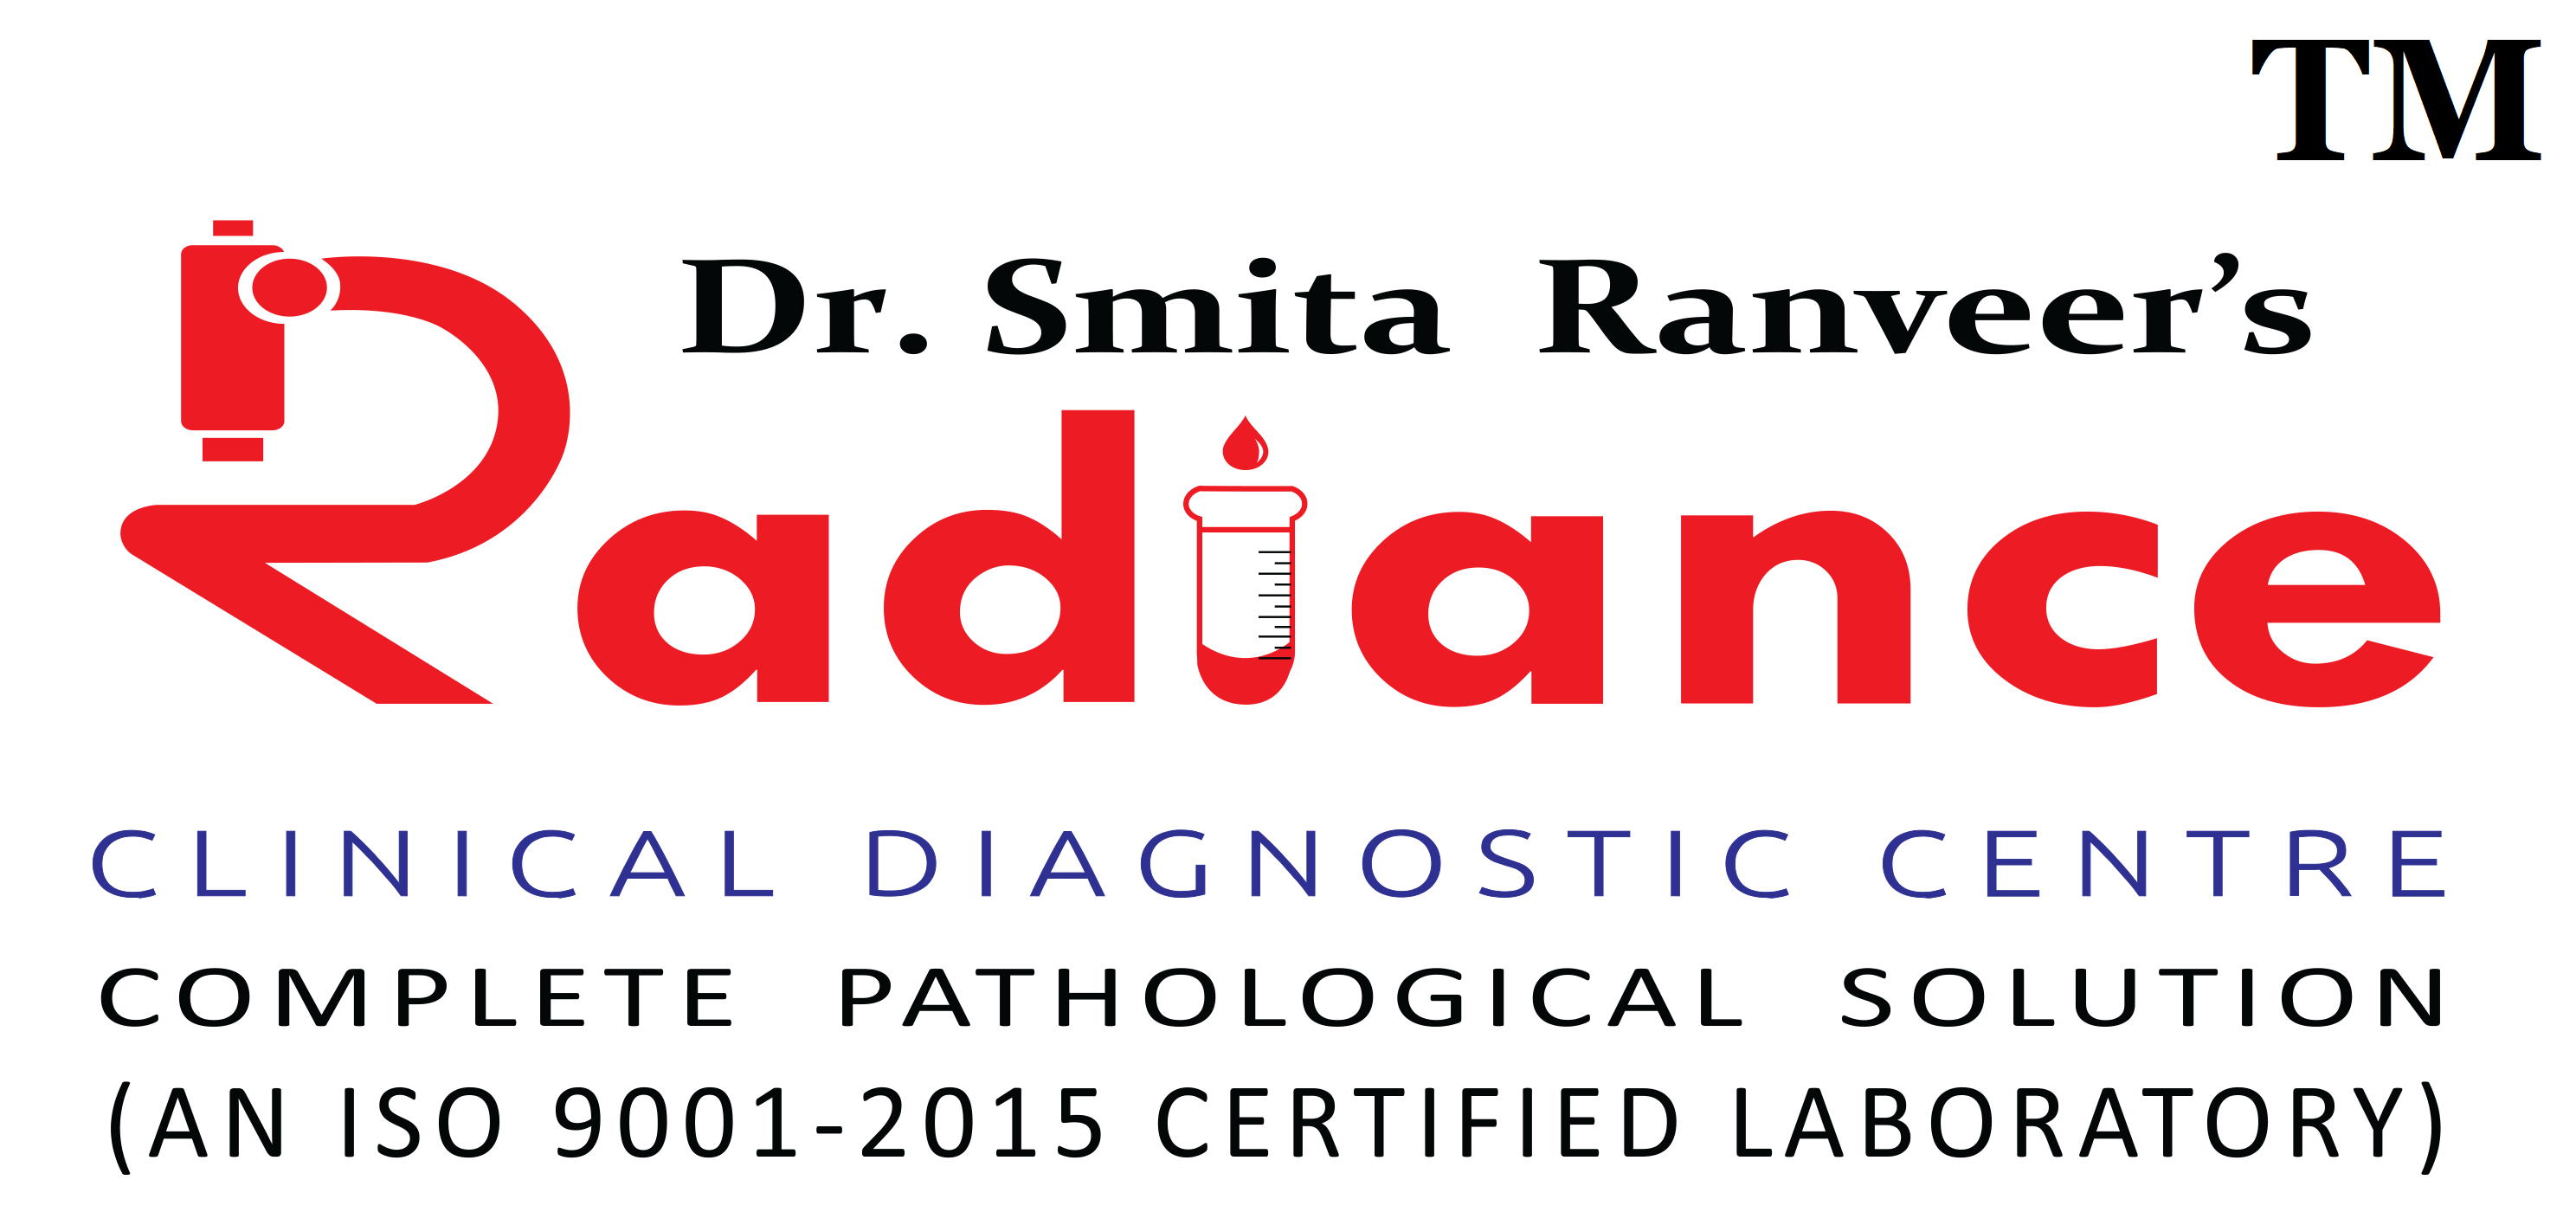 Discovering Radiance: The Premier Pathology Clinic in Thane - Thana Professional Services